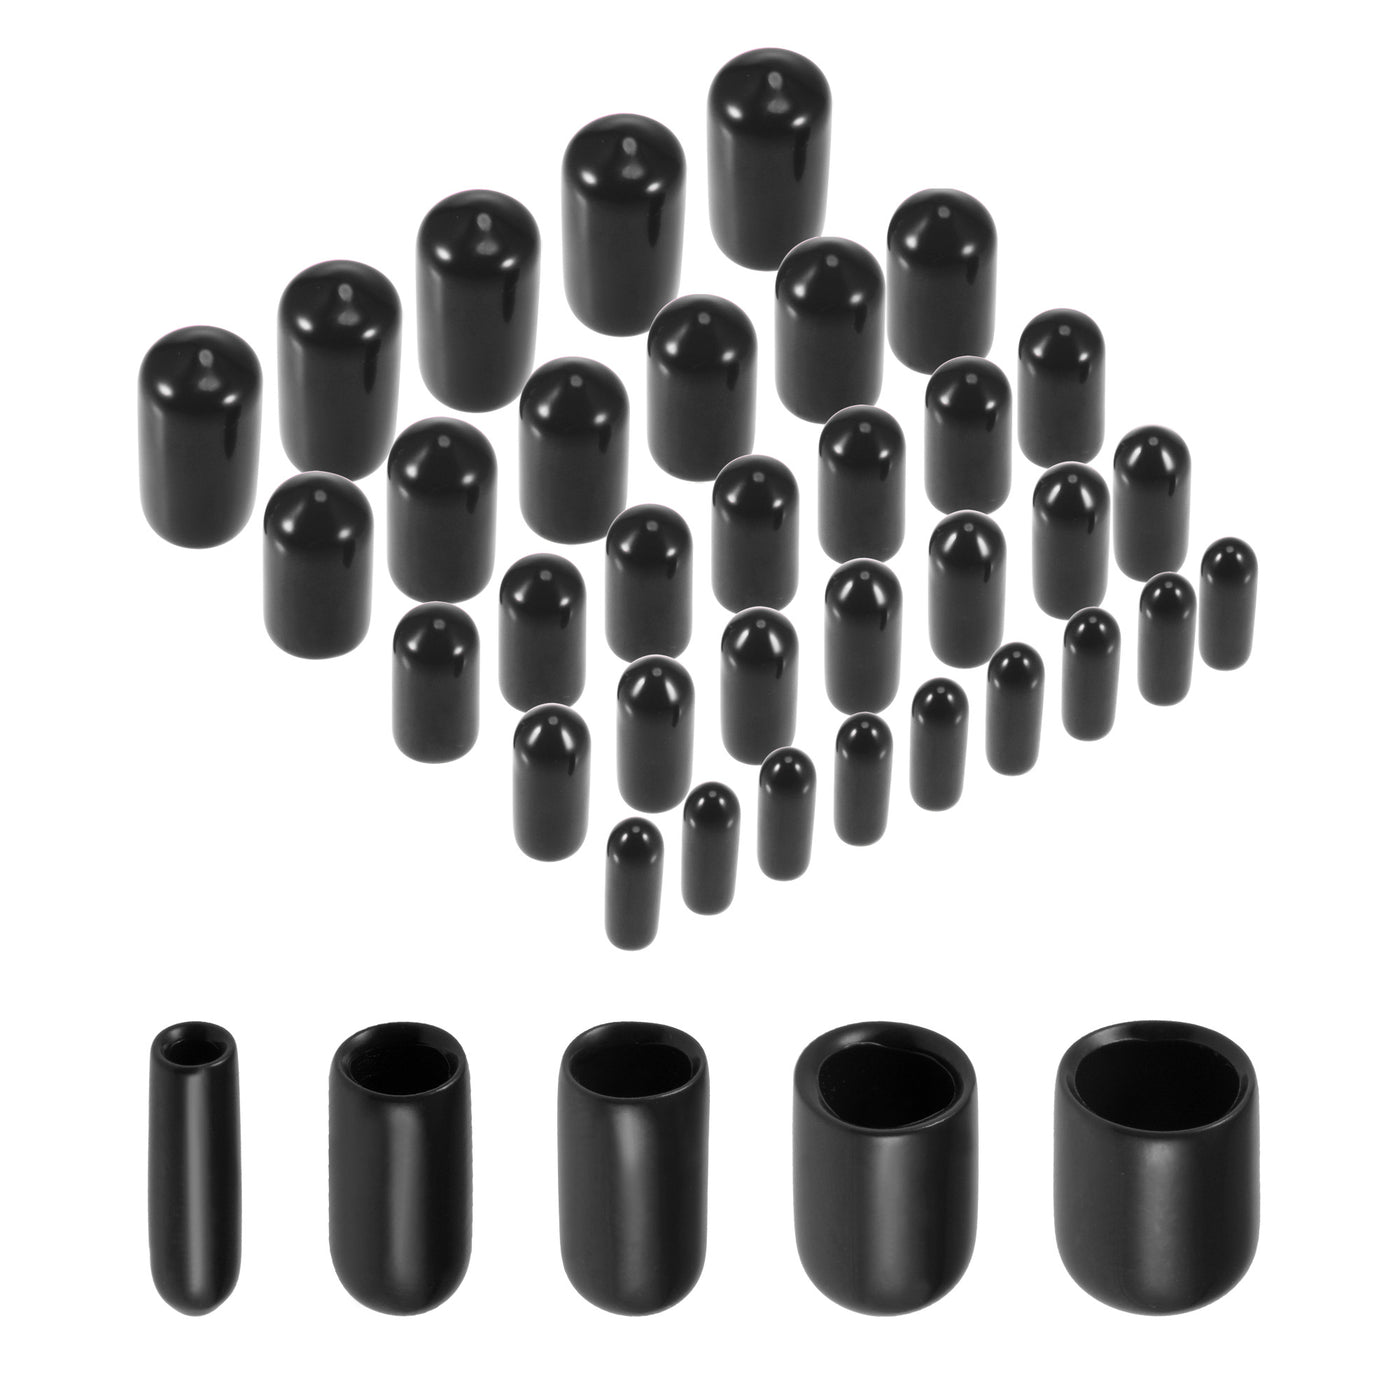 uxcell Uxcell Round Rubber End Caps Vinyl Cover Screw Thread Protector Assortment Kits